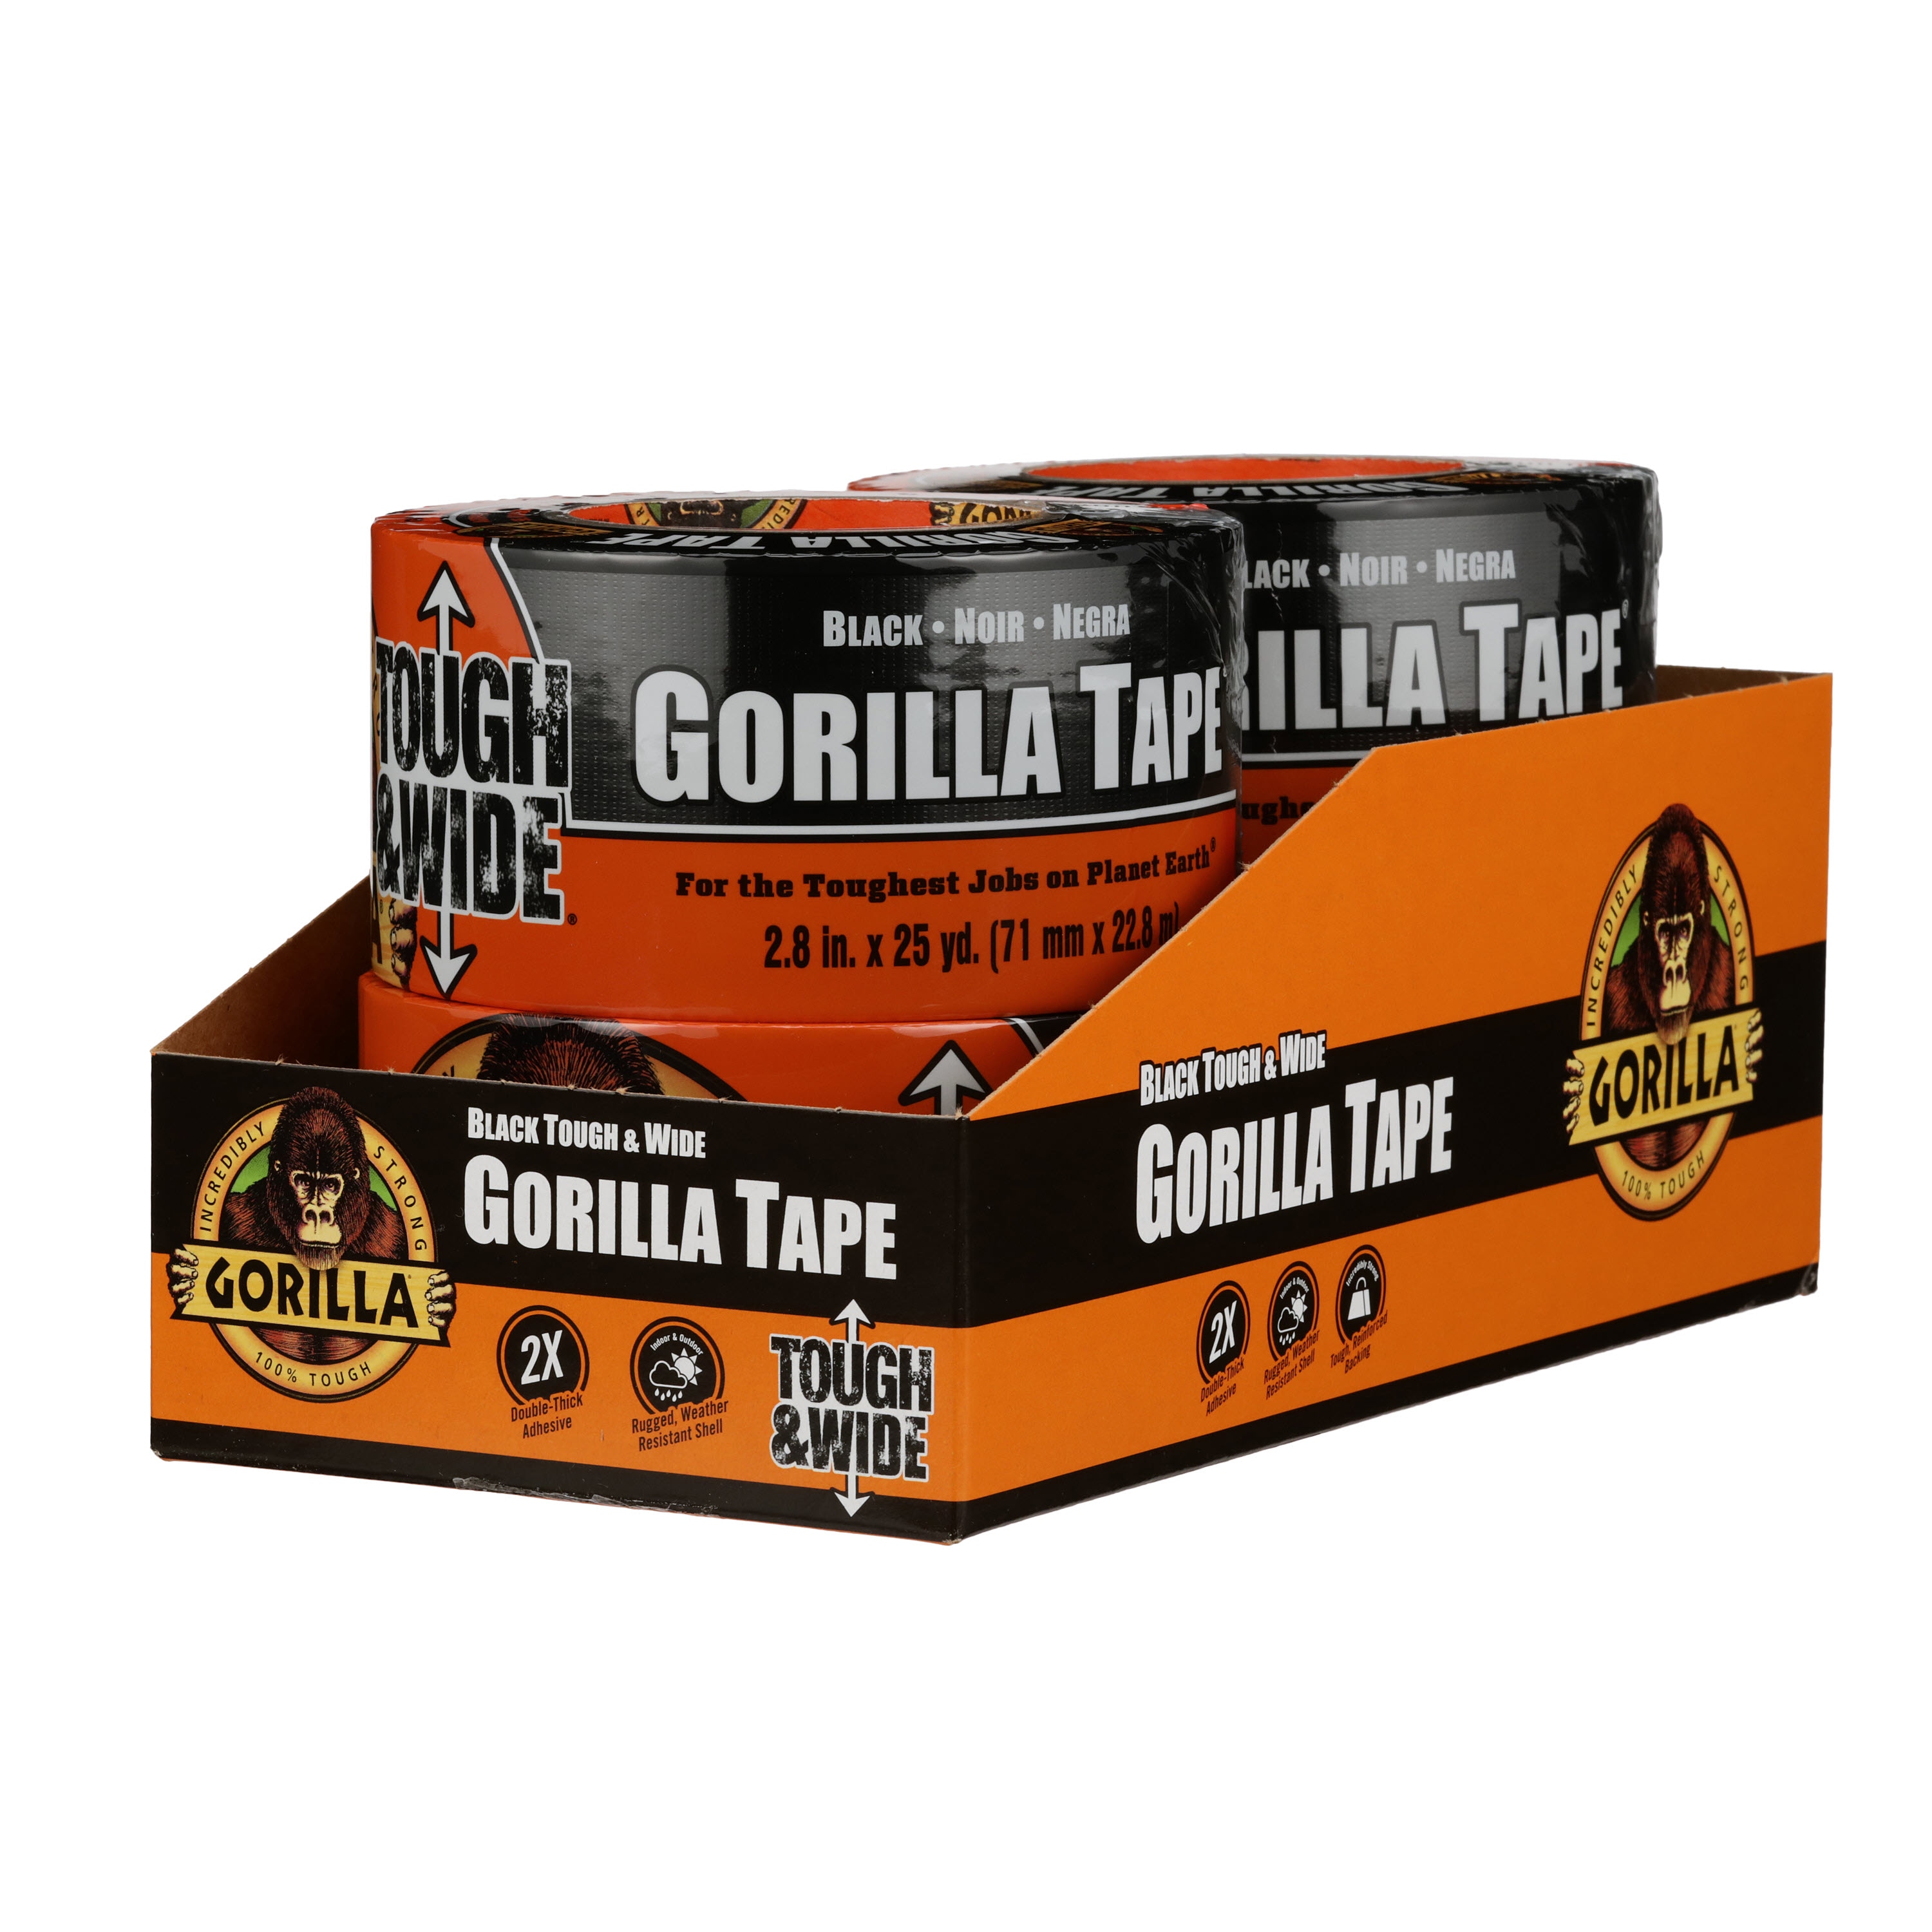  Gorilla Double-Sided Tape, 1.41 x 8 yd, Gray, (Pack